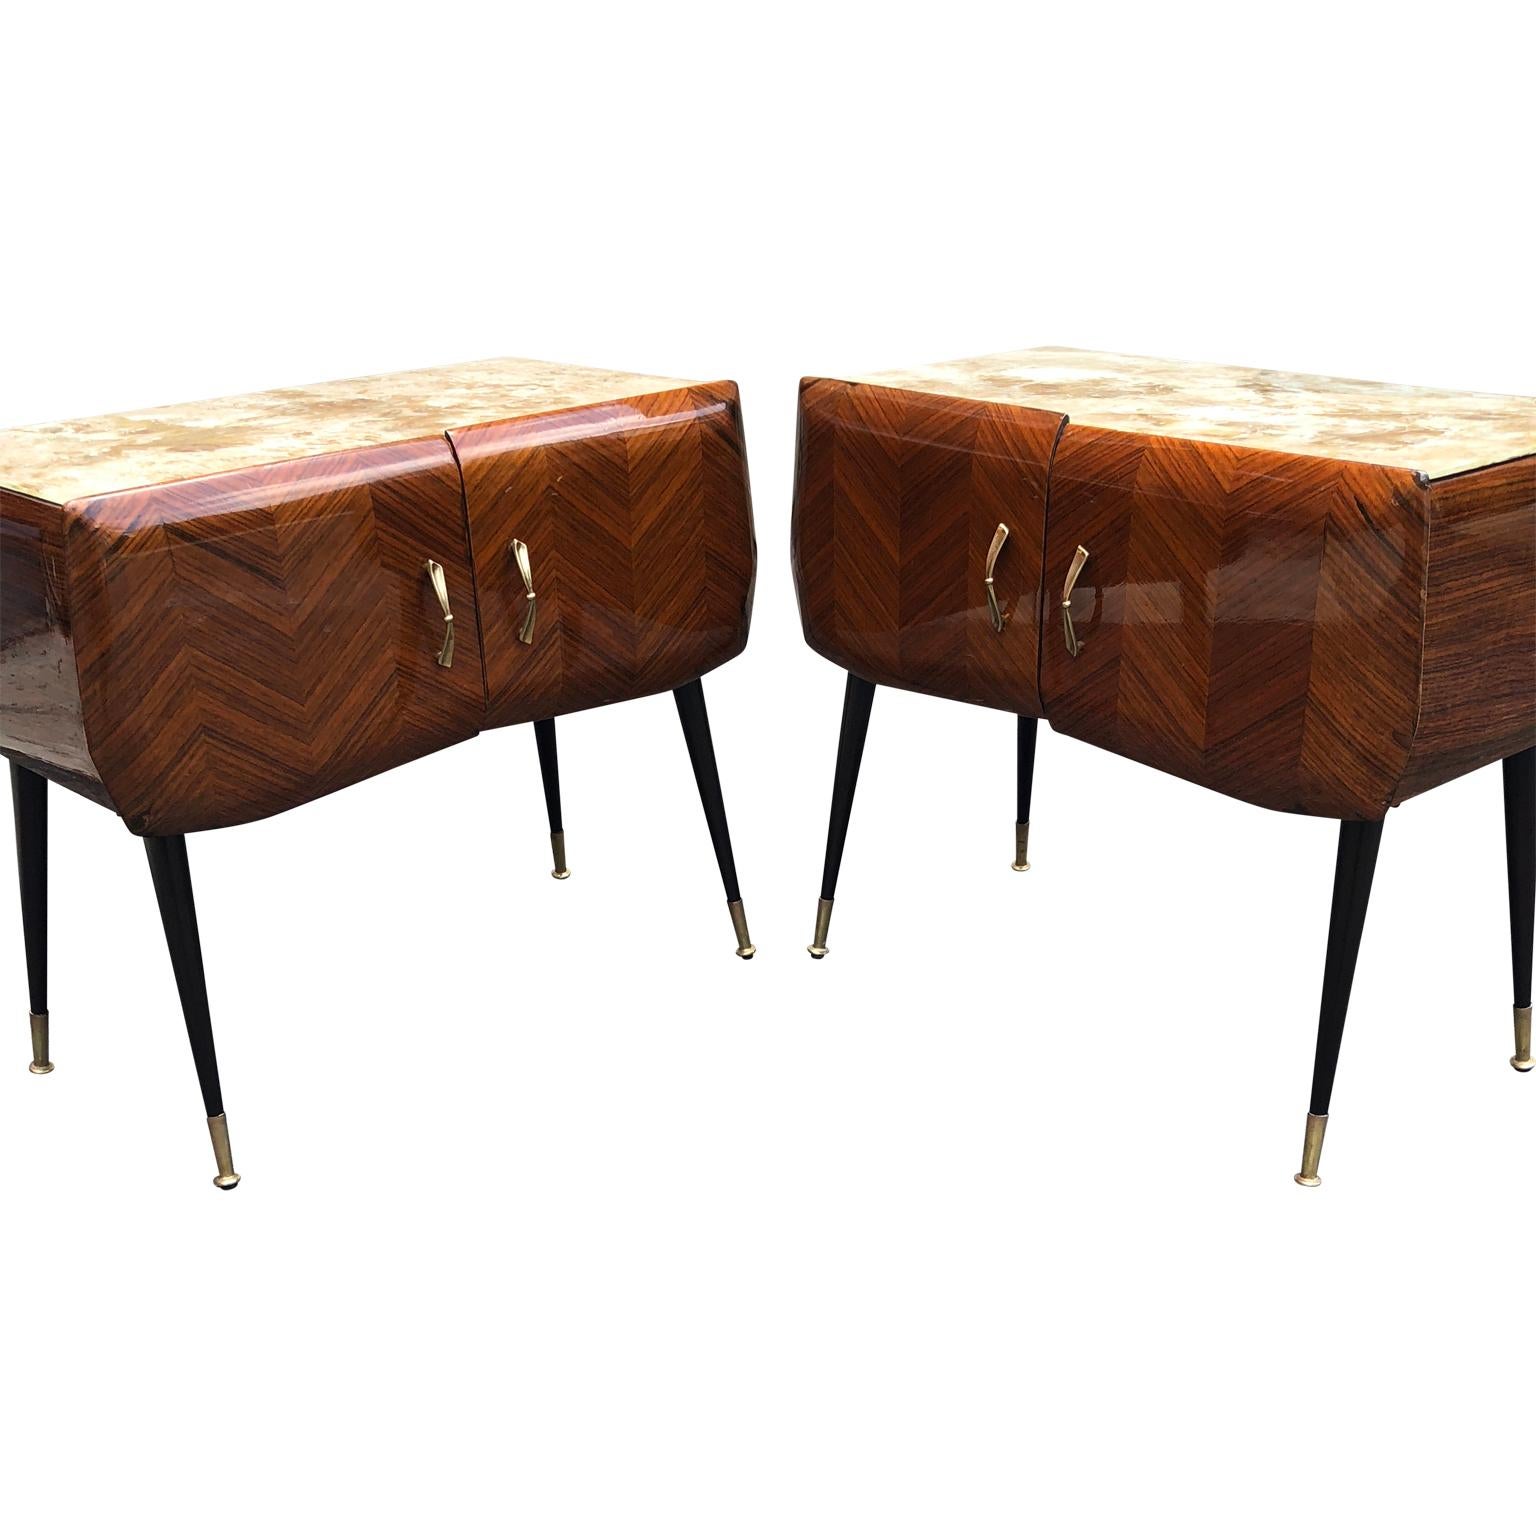 Brass Pair of Italian Mid-Century Modern Vittorio Dassi Bed Side Tables or Cabinets